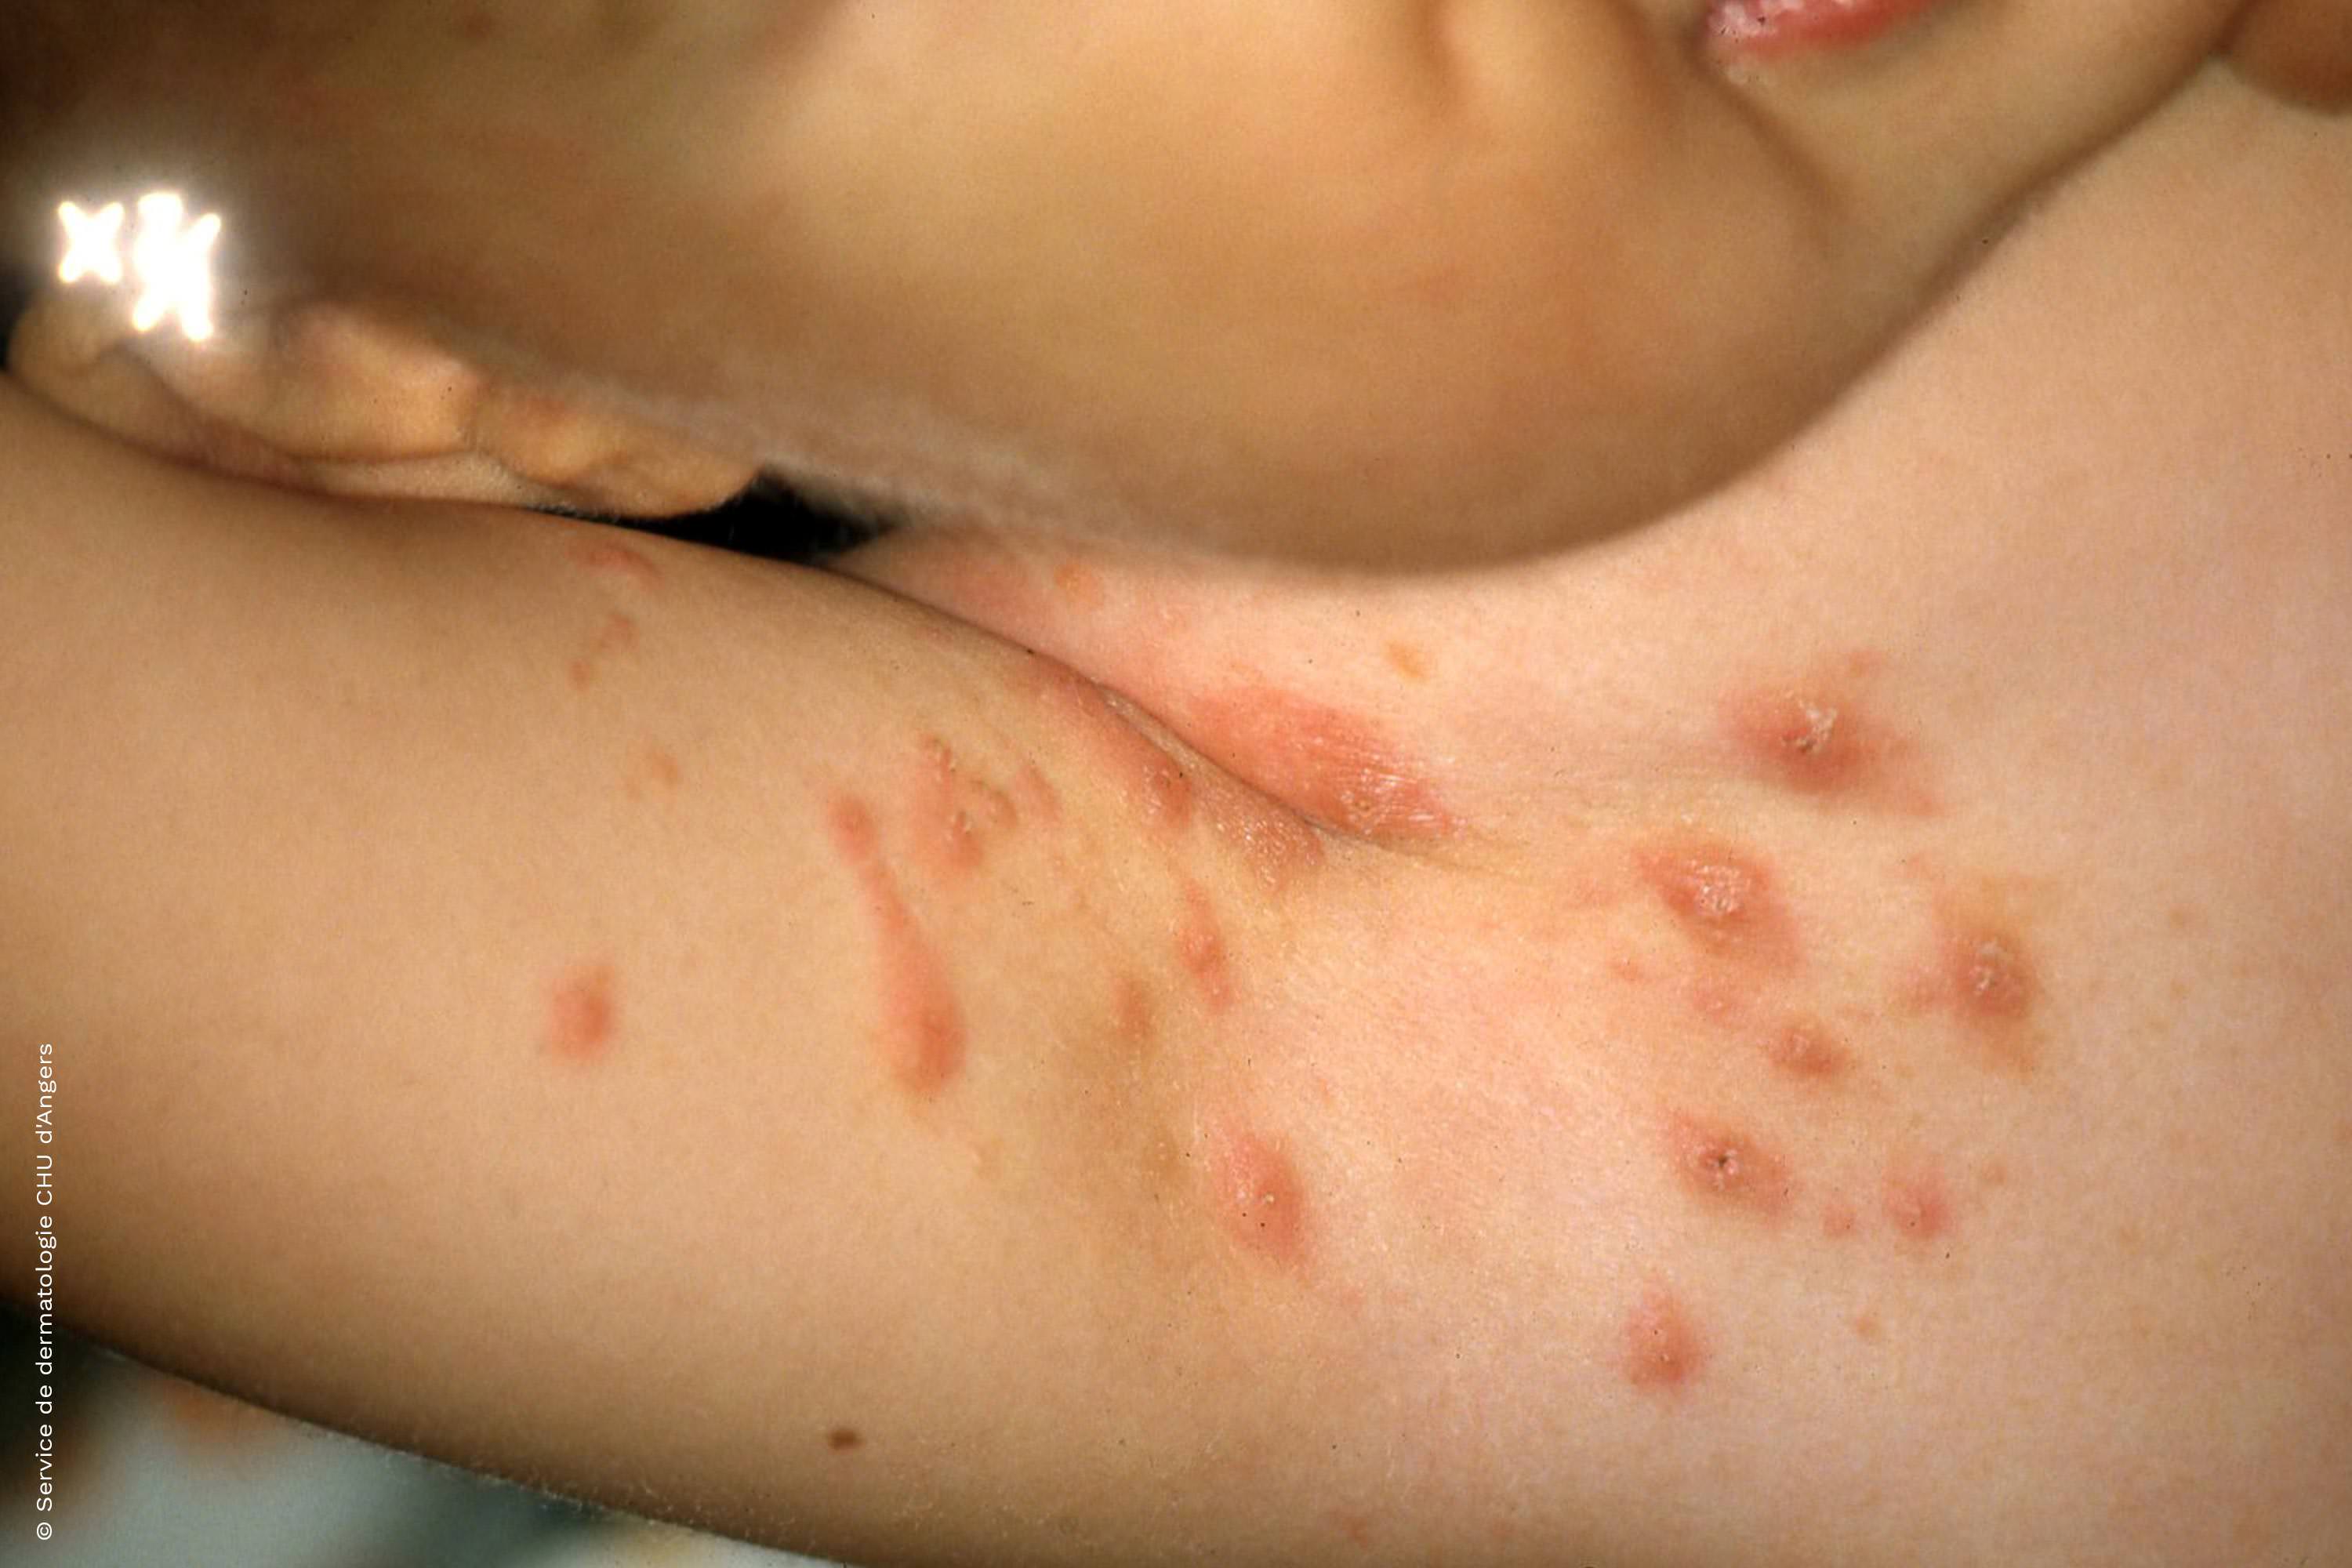 Scabies: scabious nodules of the infant